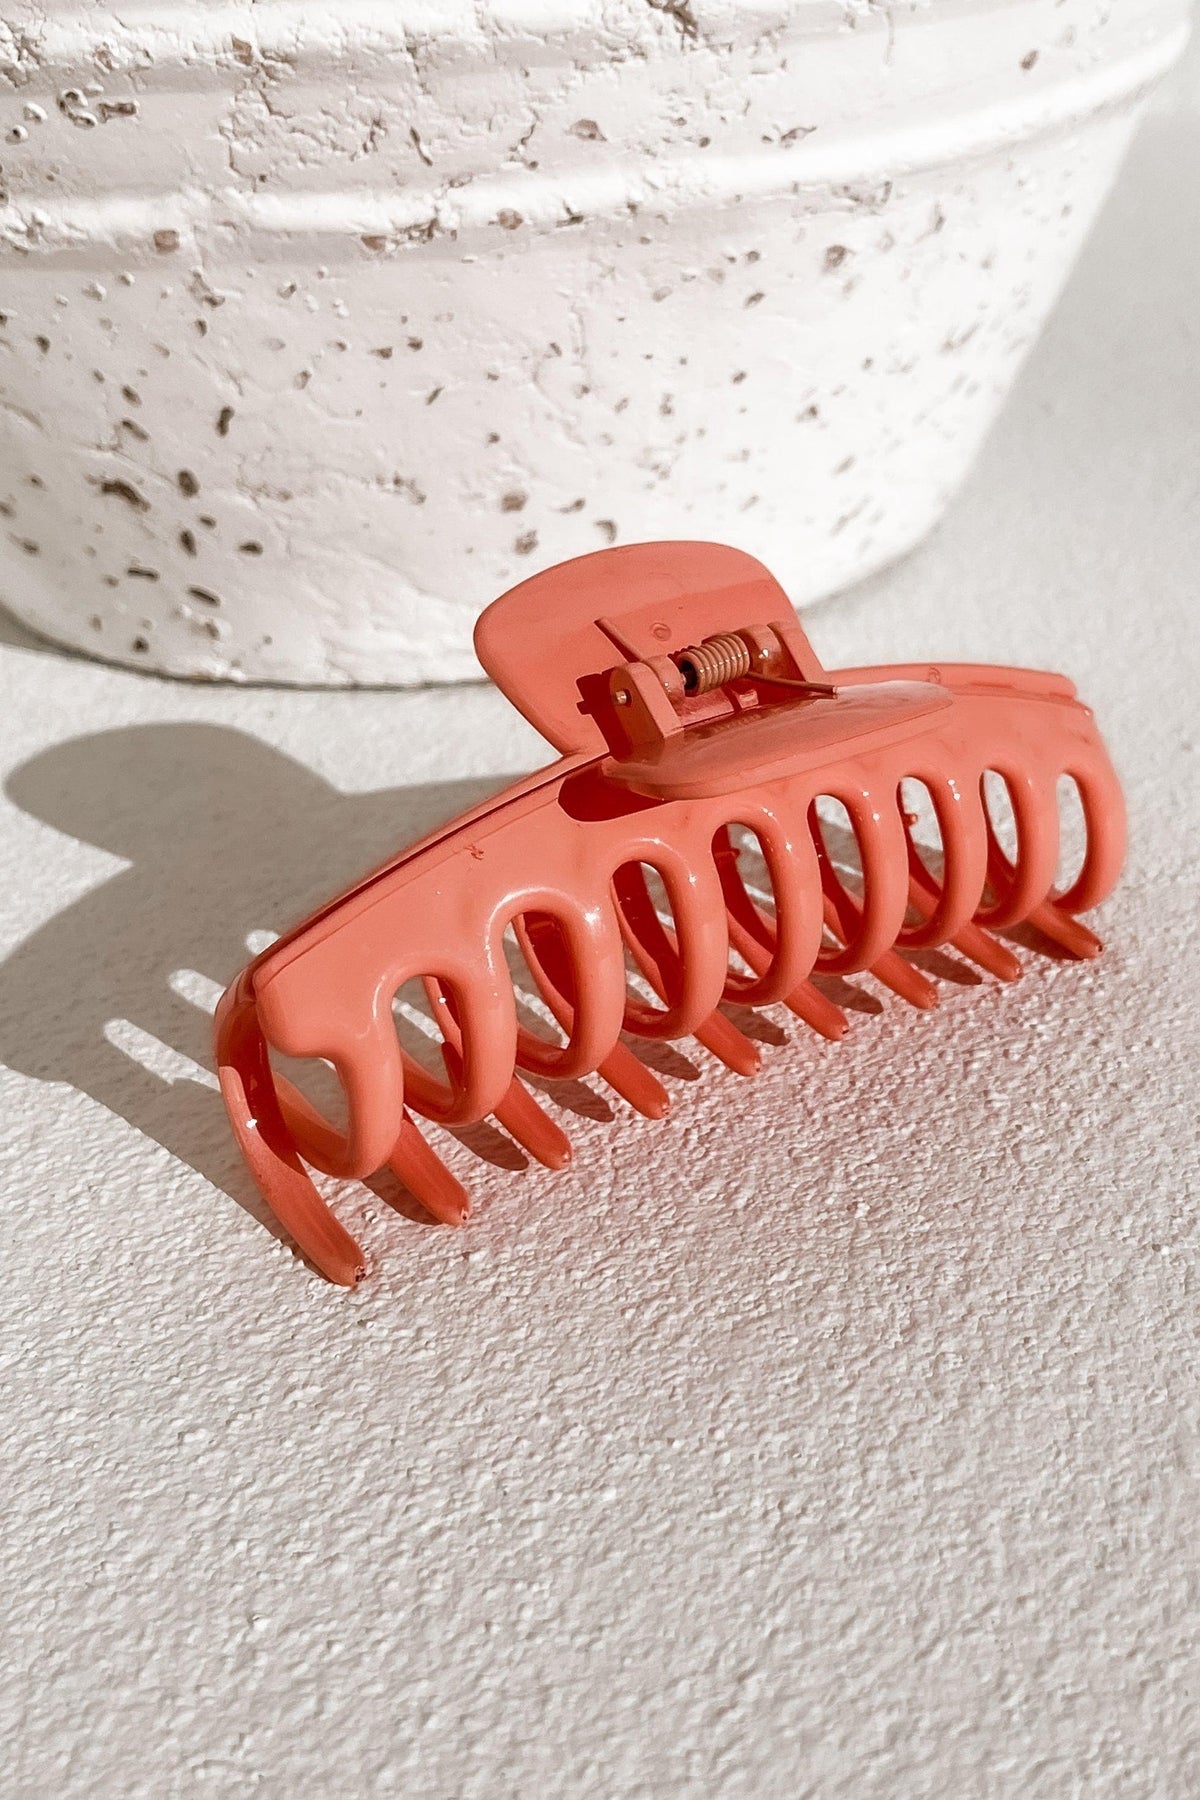 One More Time Hair Clip, ACCESSORIES, CORAL, HAIR CLIPS, NEW ARRIVALS, ORANGE, PINK, Our New One More Time Hair Clip Is Now Only $18.00 Exclusive At, We Have The Latest Fashion Accessories @ Mishkah Online Fashion Boutique Our New One More Time Hair Clip is now only $18.00-MISHKAH